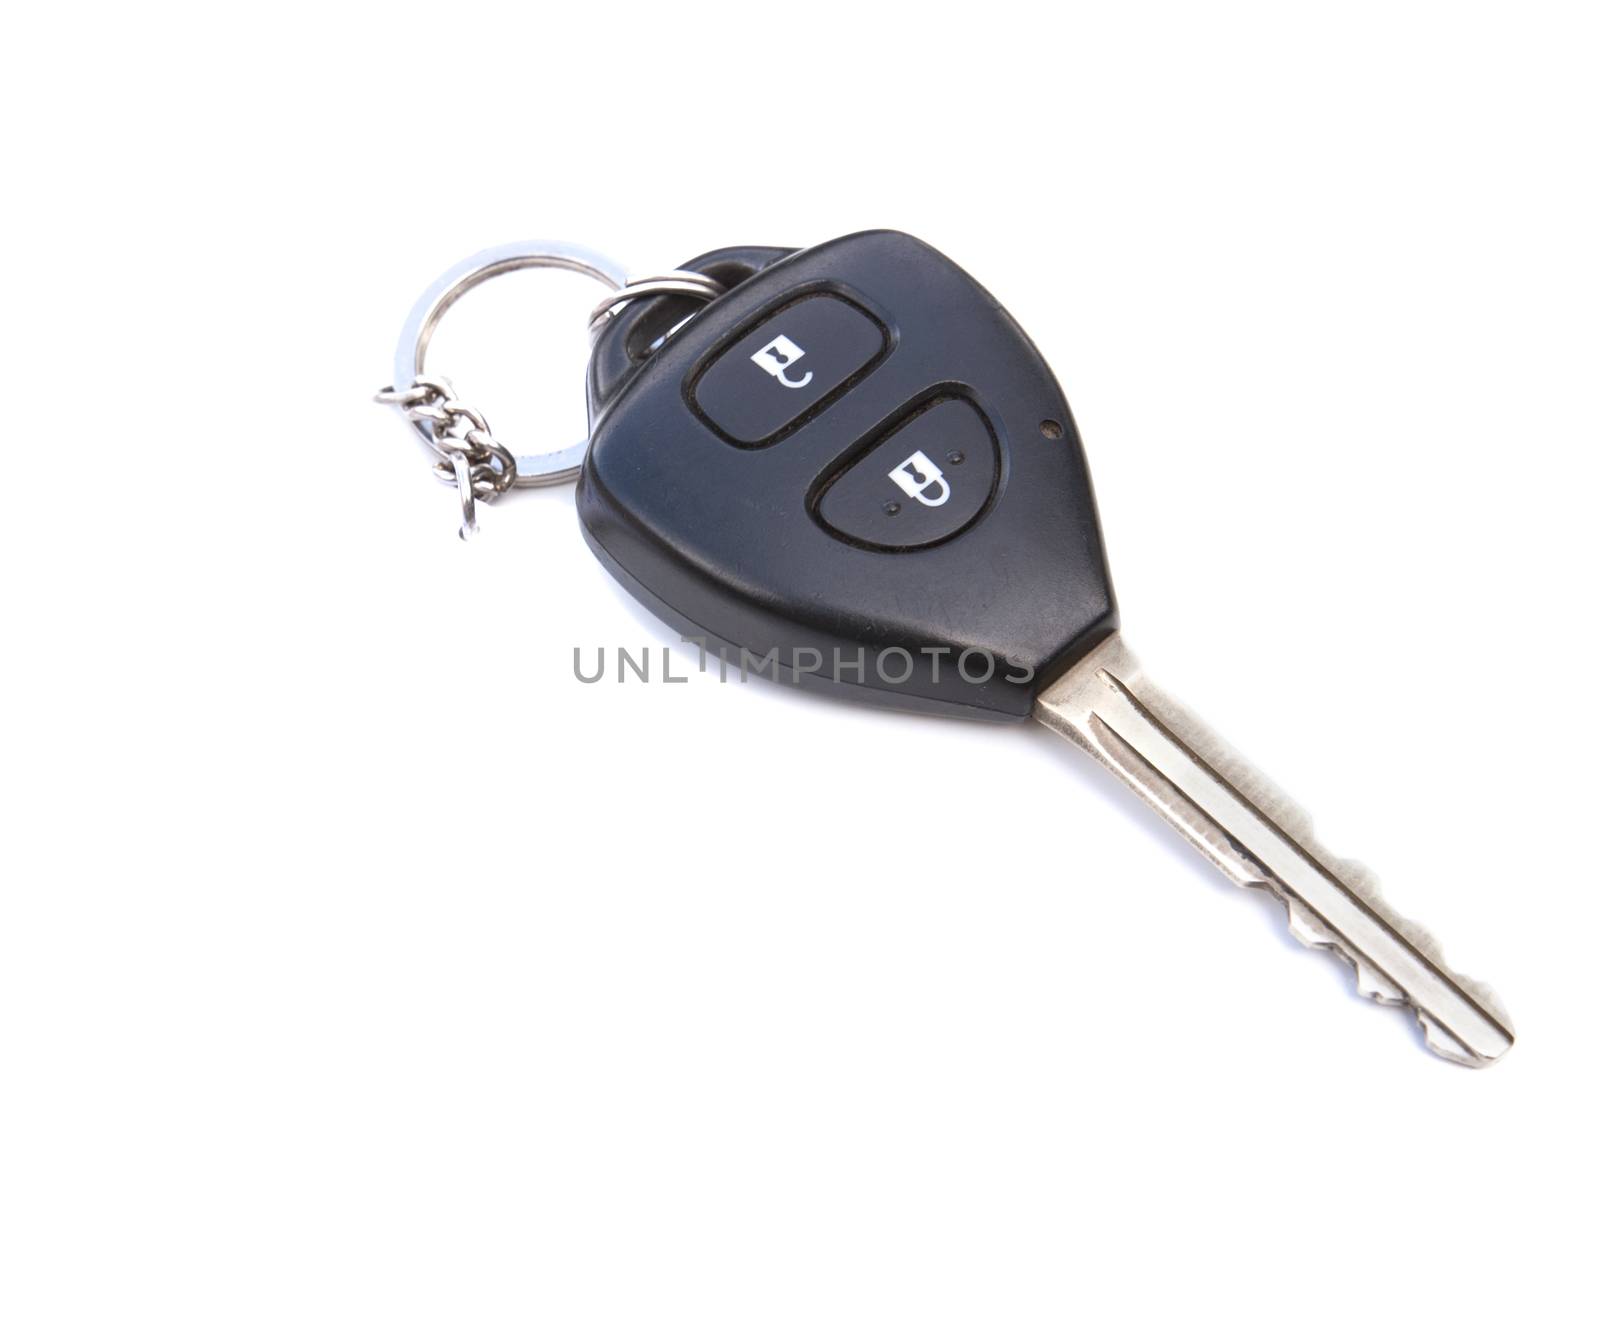 Key of car, Object isolated on a white background